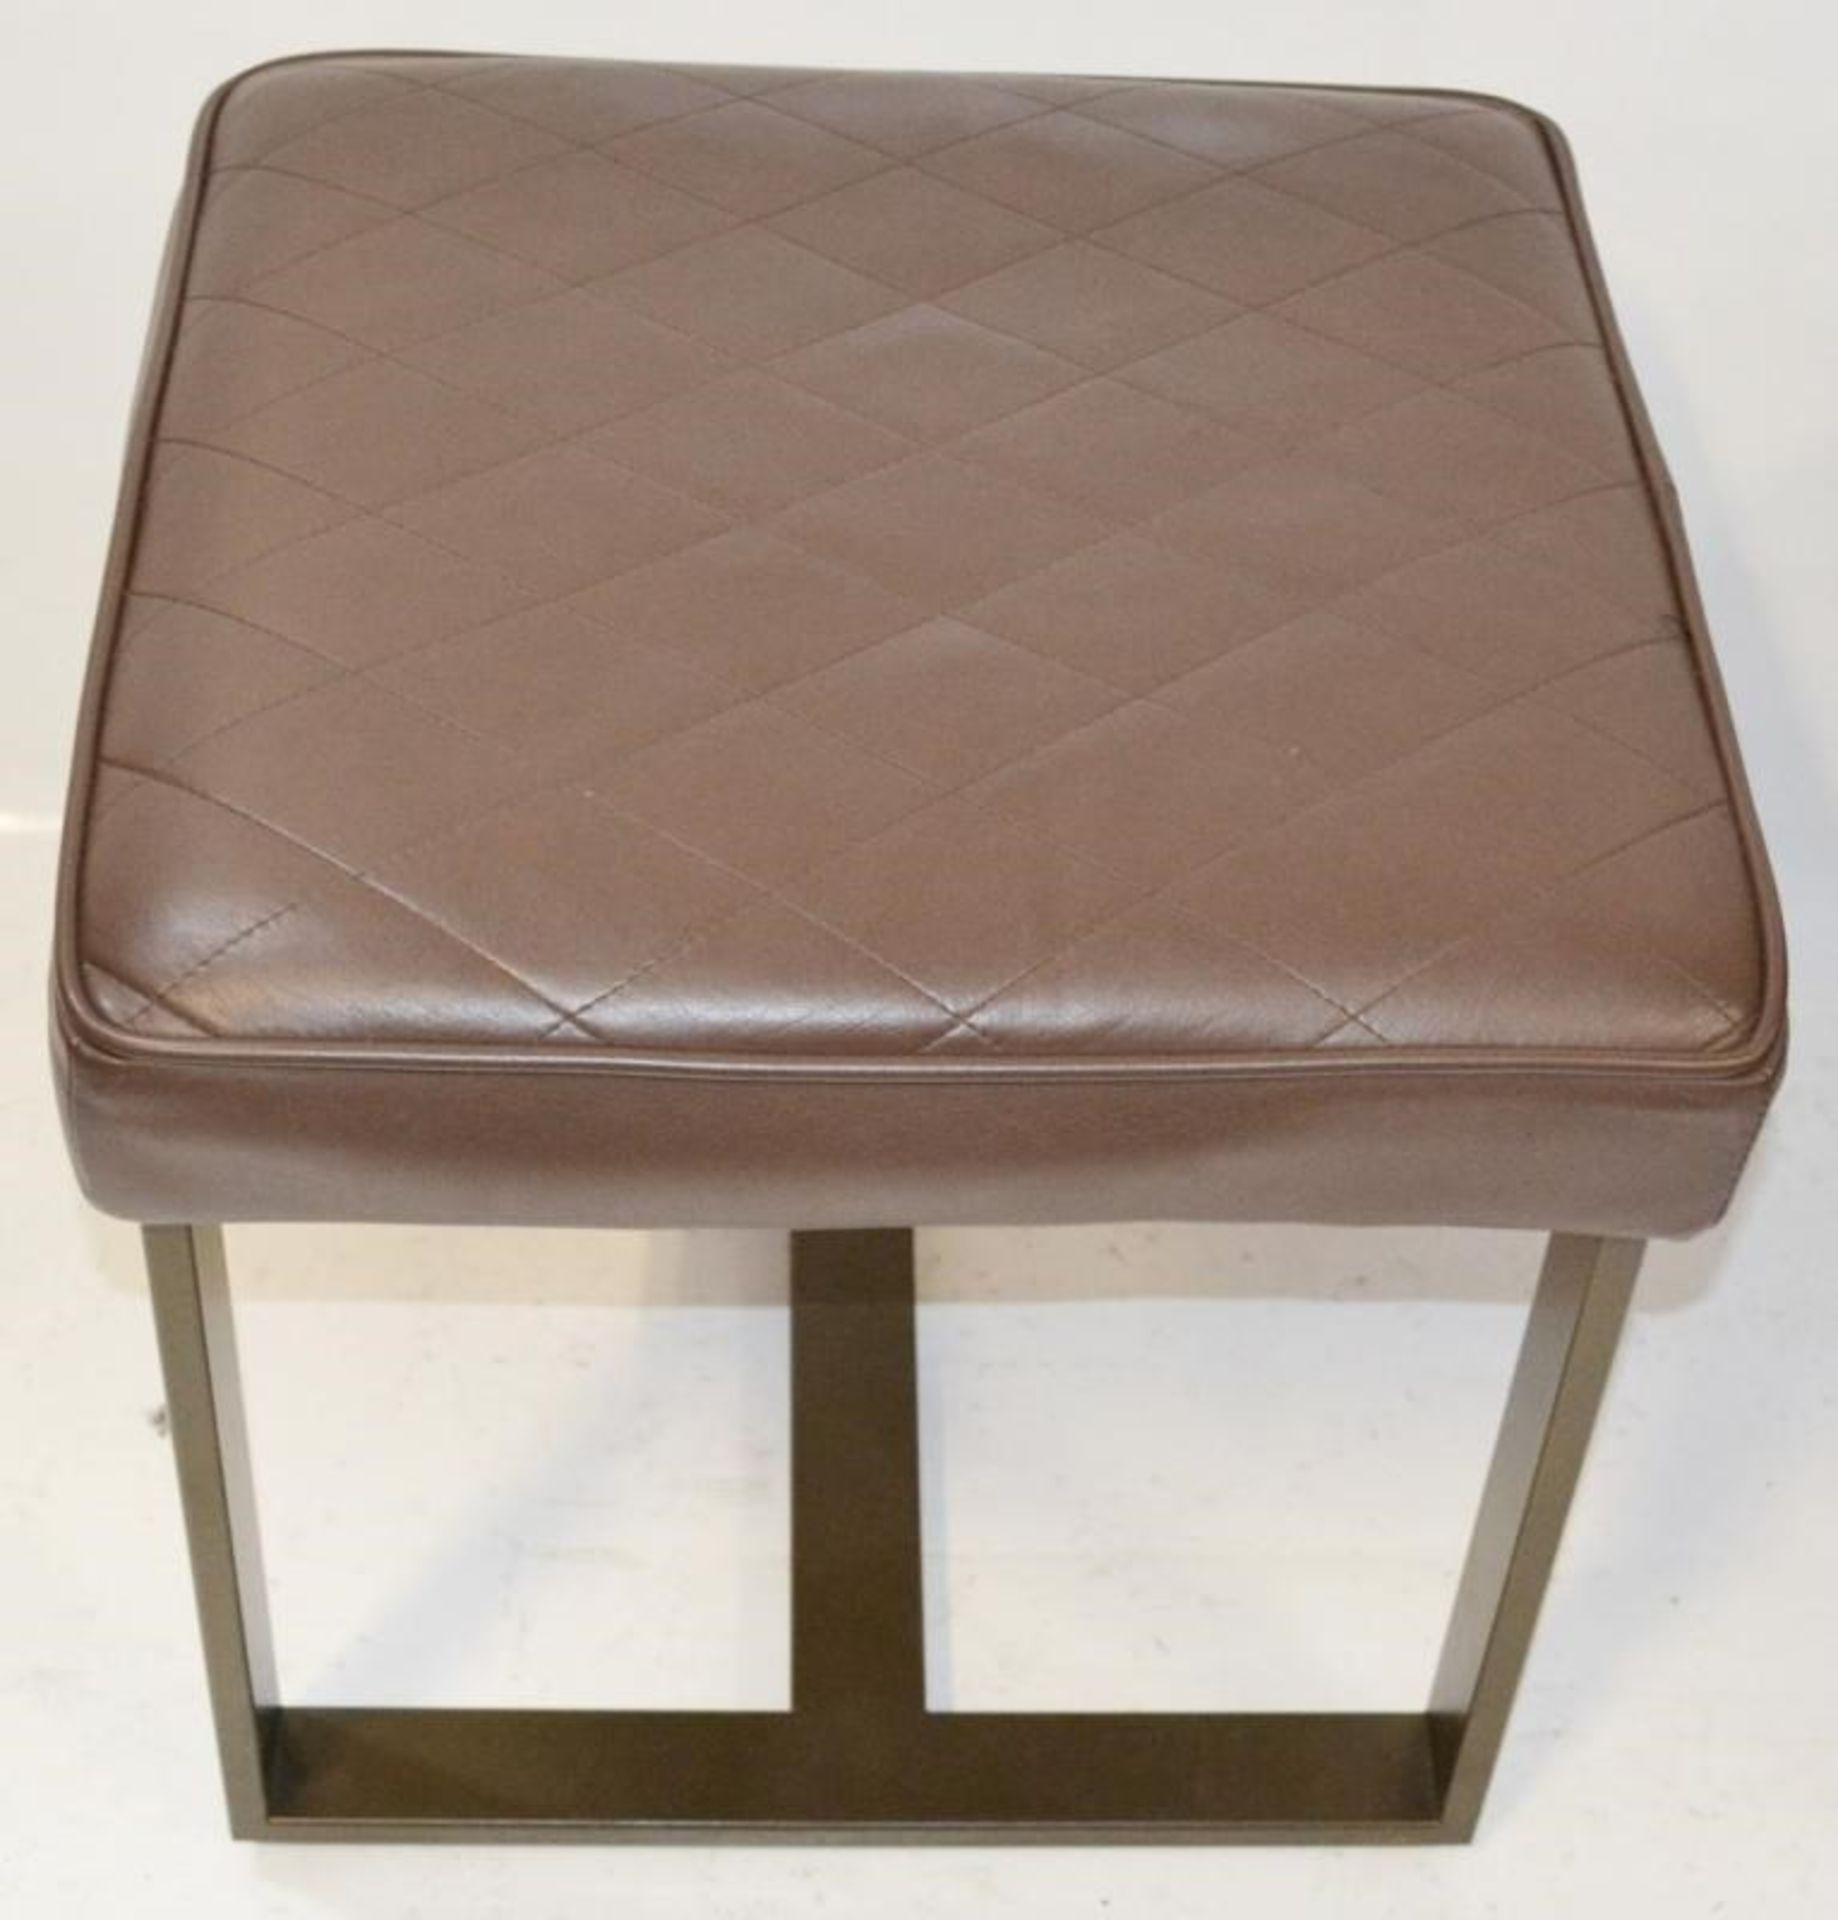 2 x Contemporary Seat Stools With Brown Faux Leather Cushioned Seat Pads - Image 4 of 5